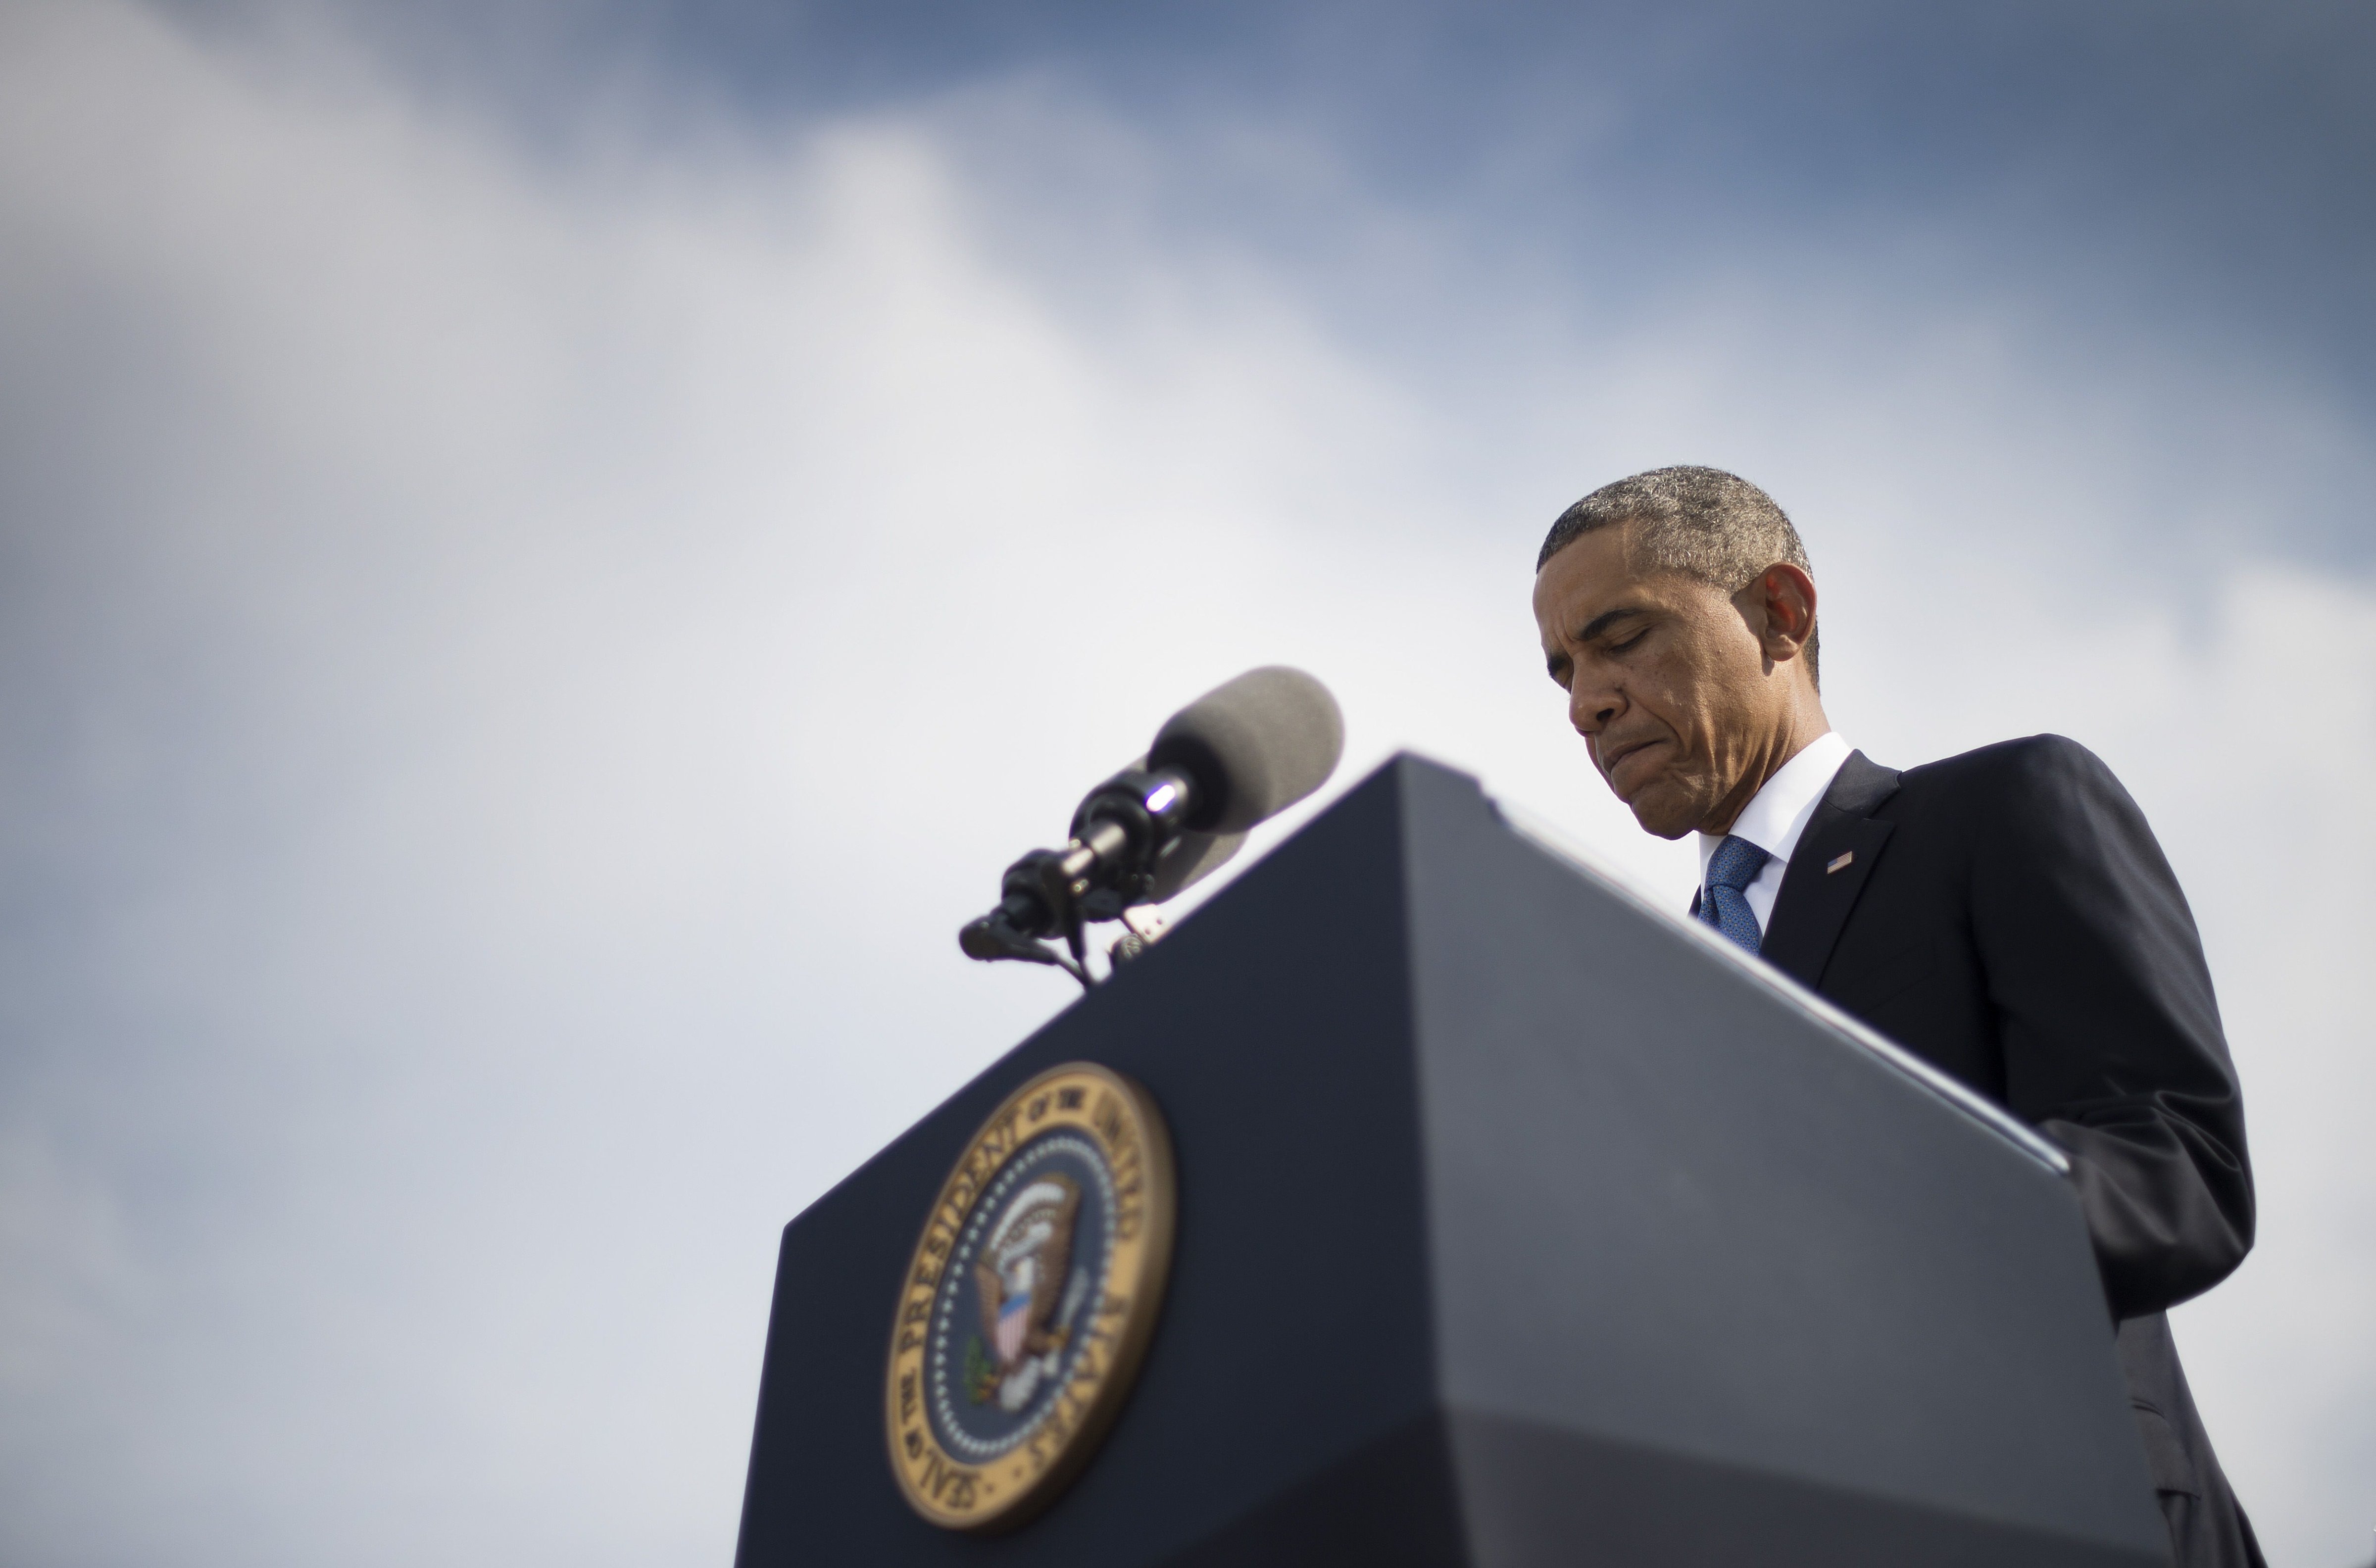 US President Barack Obama speaks at the Pentagon in Washington, DC, September 11, 2014, during a ceremony marking the 13th anniversary of the 9/11 attacks on the United States. (Jim Watson&mdash;AFP/Getty Images)